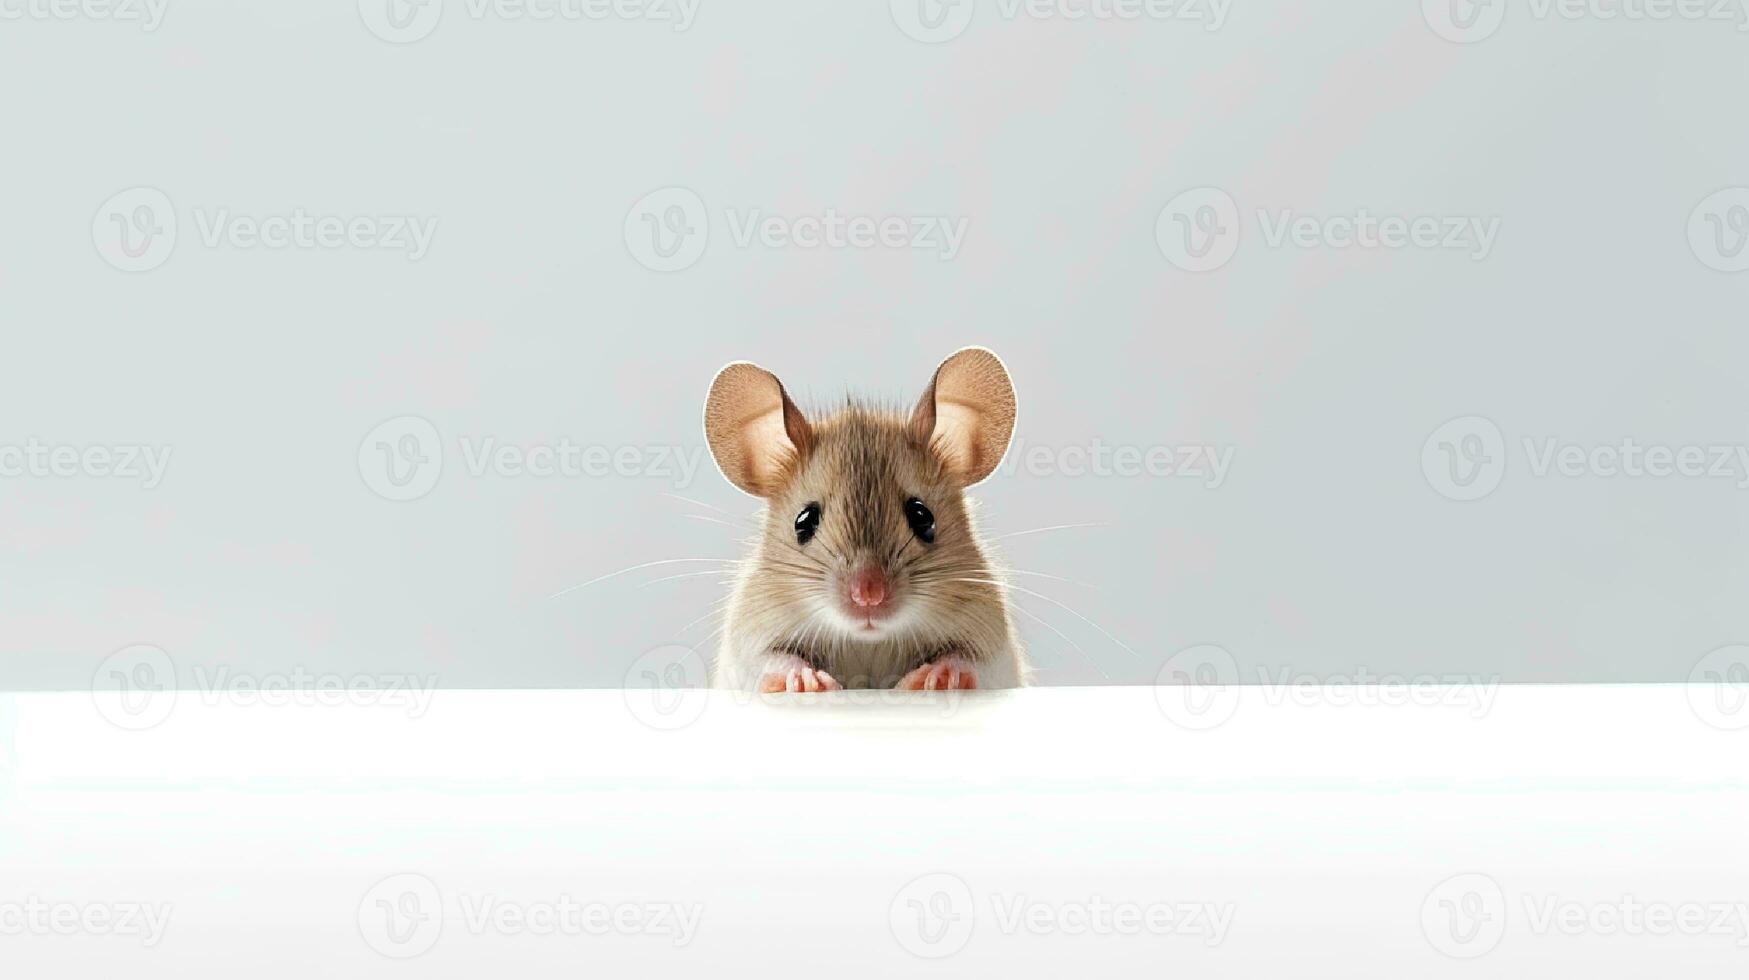 Photo of a mouse on white background